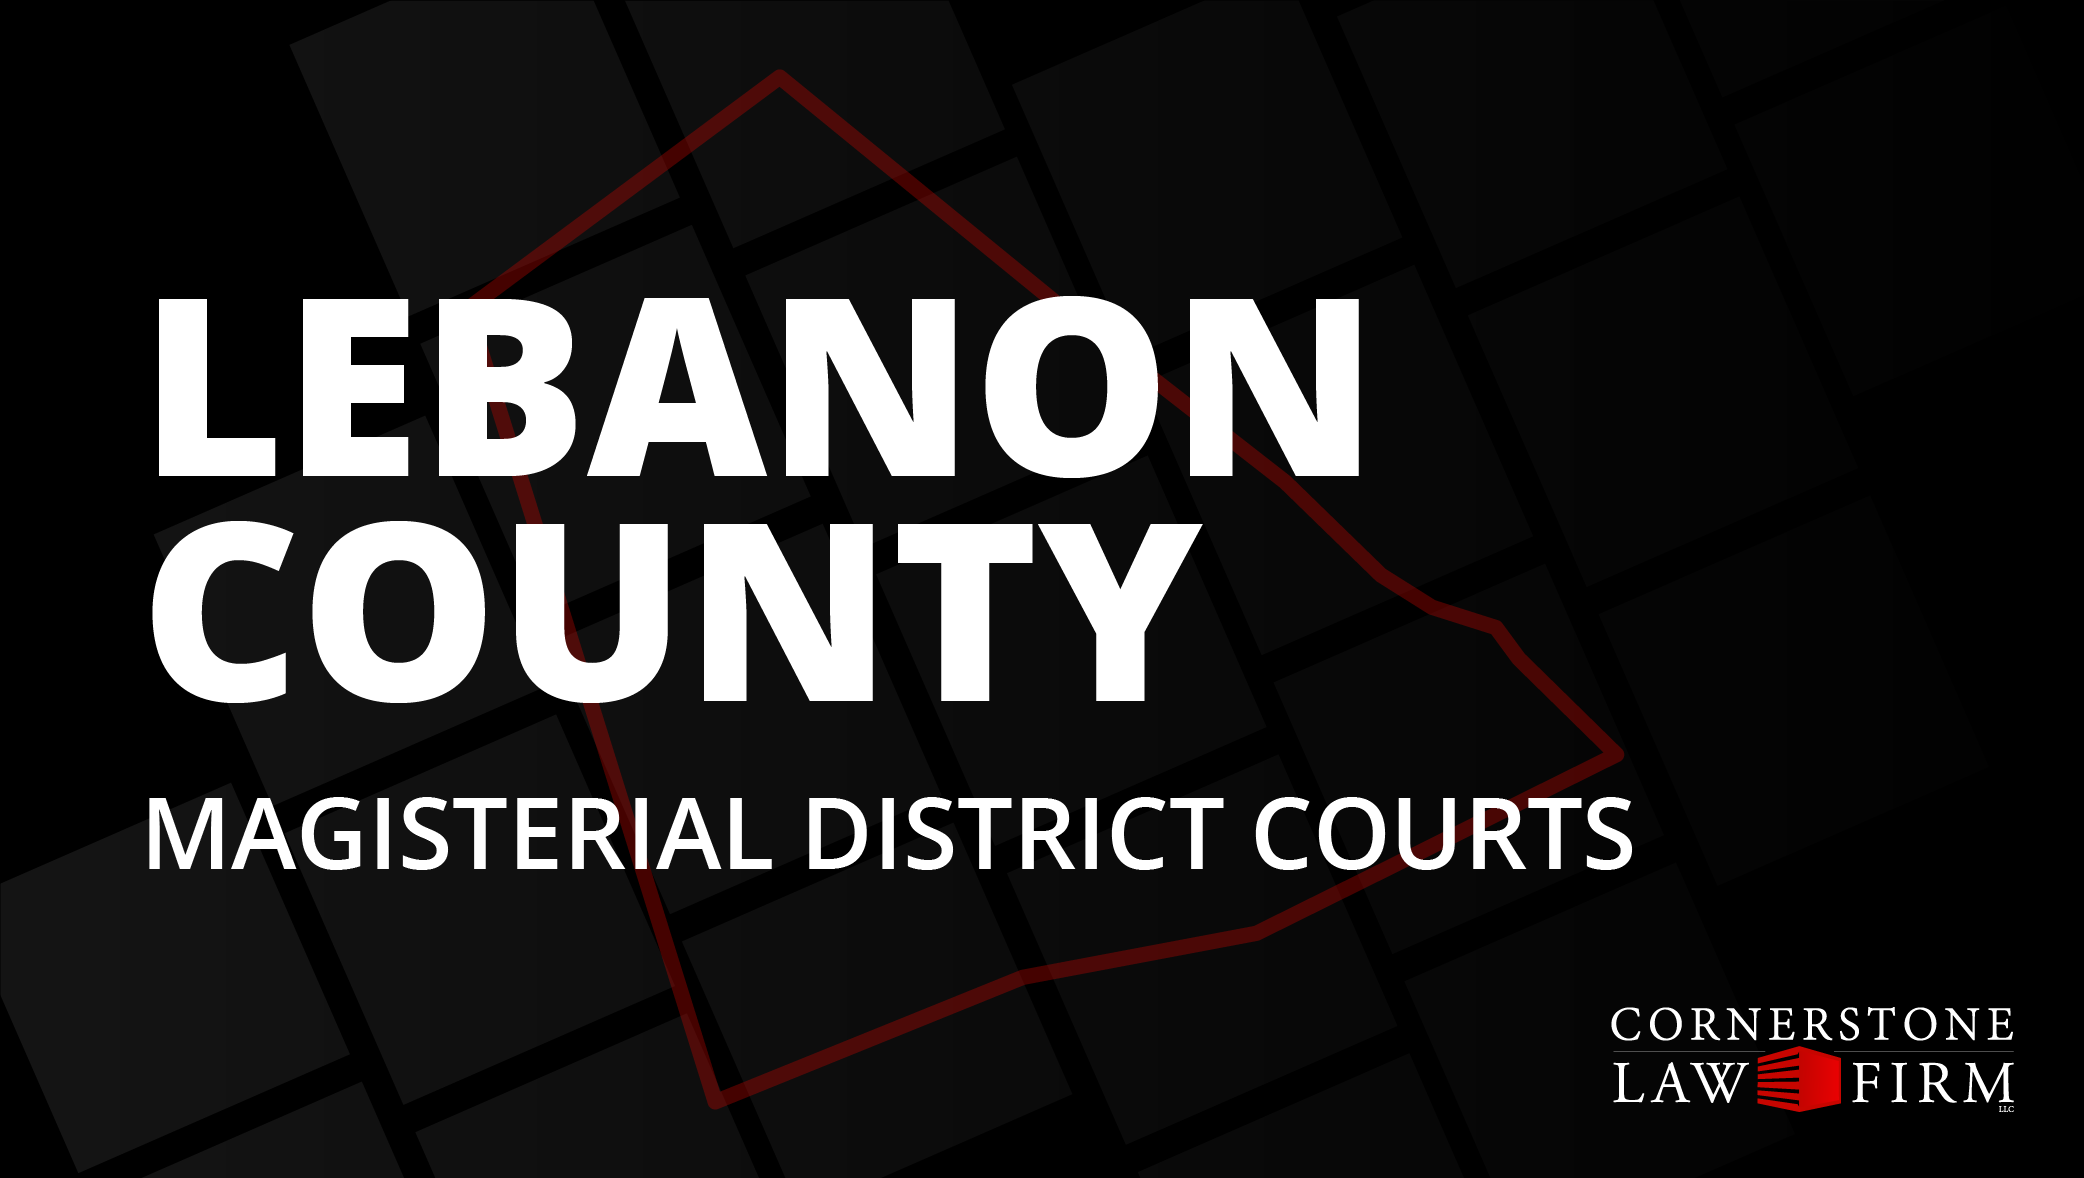 The words "Lebanon County Magisterial District Courts" over a black background with a faded red outline of the county.